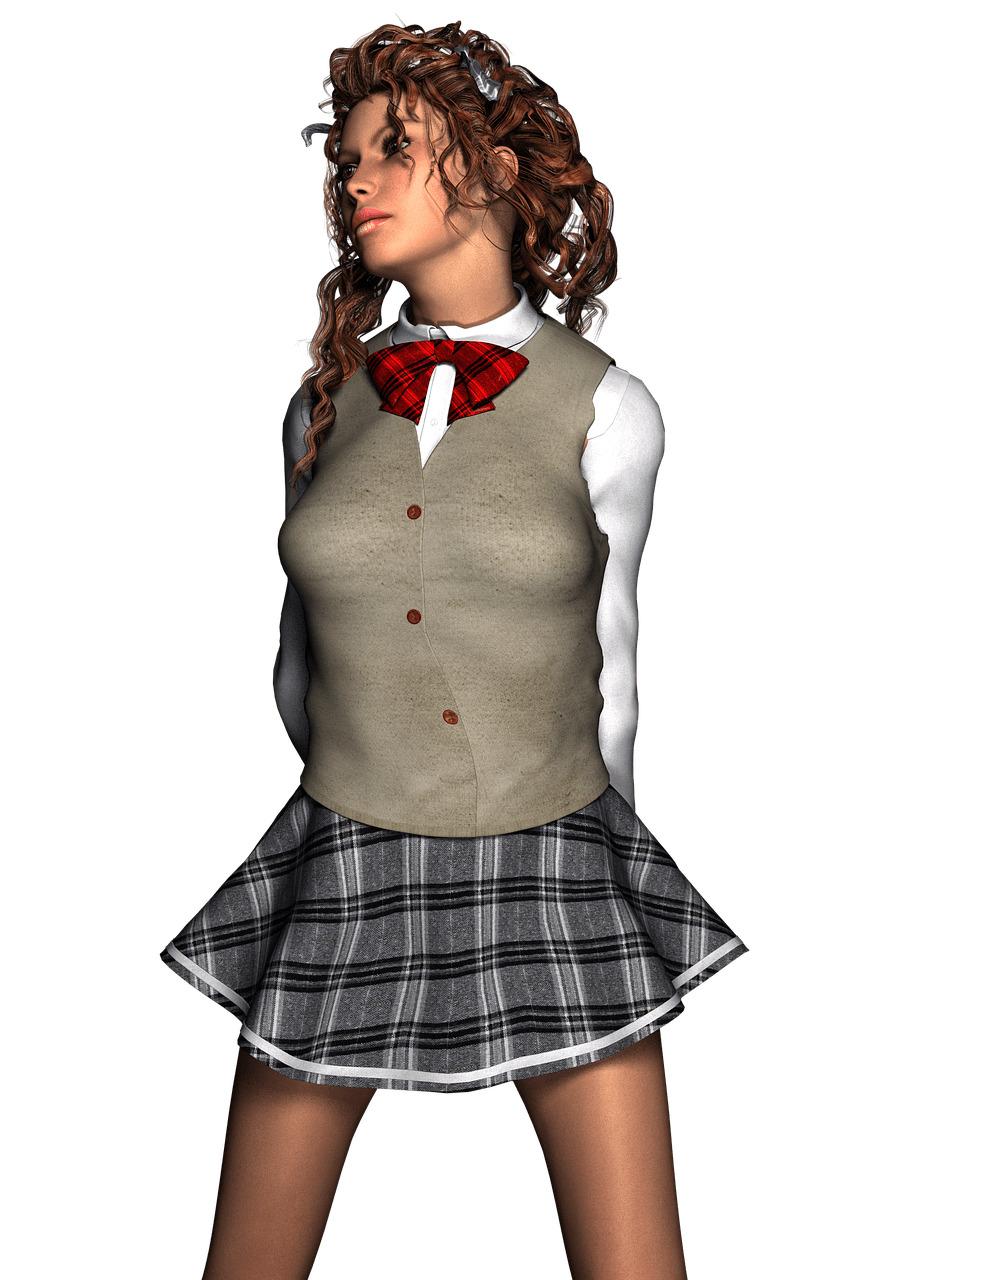 Woman With Grey Checkered Skirt png transparent